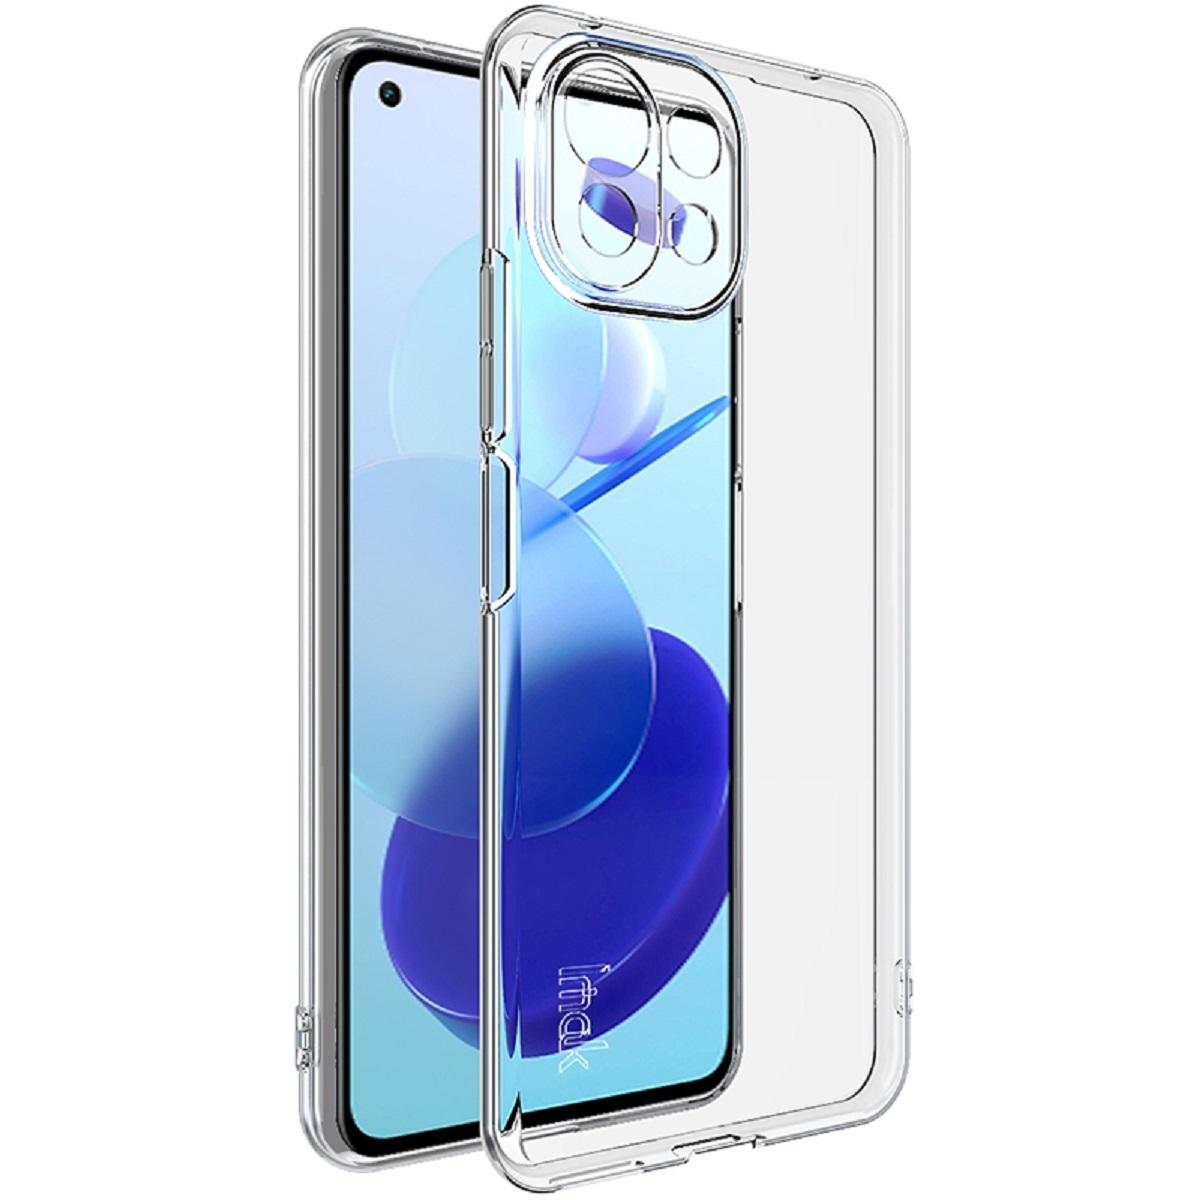 Hülle, Lite, PROTECTORKING Mi Backcover, Xiaomi, Transparent Backcover, 11